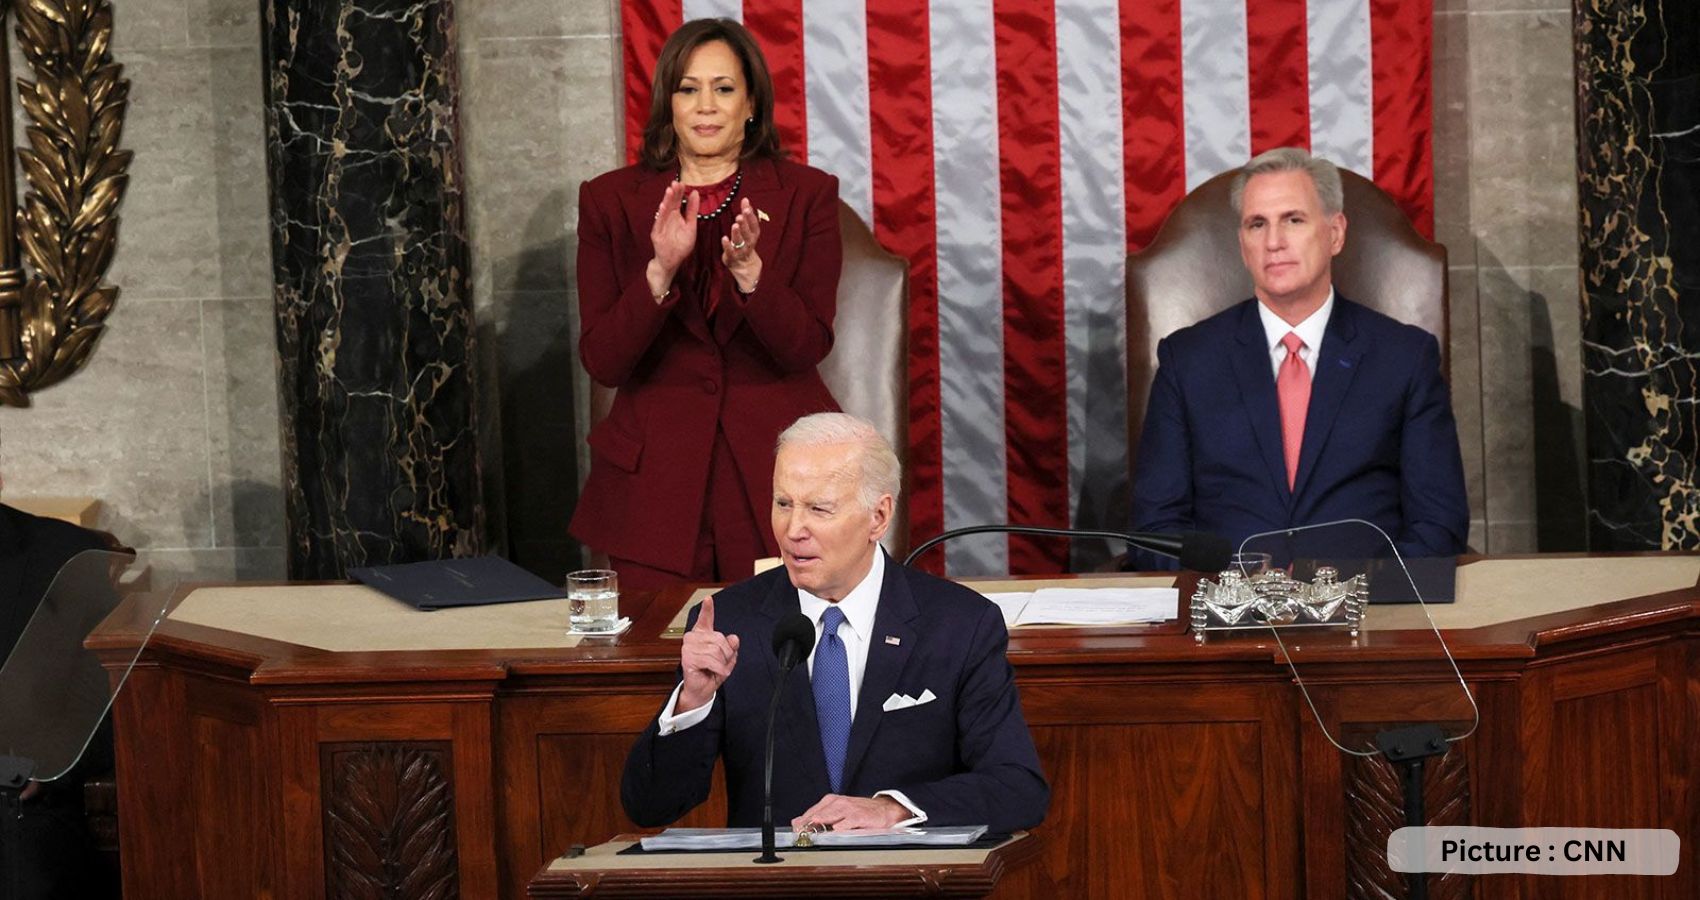 Biden’s State Of The Union Address Filled With Optimism For Future